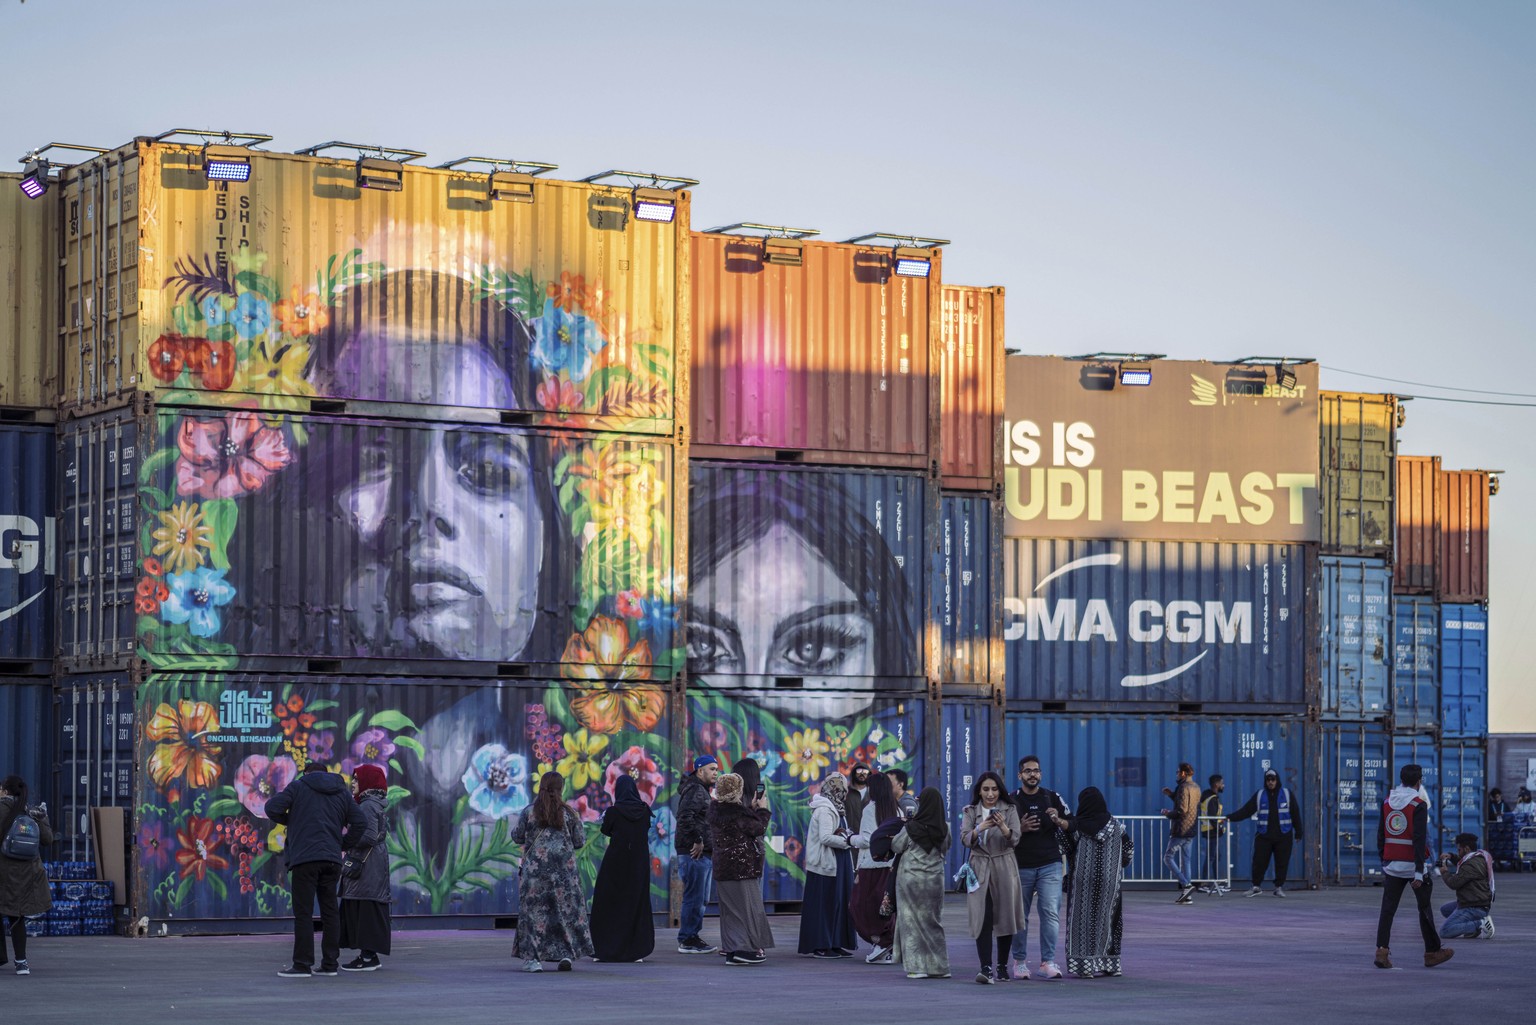 In this Saturday Dec. 21, 2019 photo, people walk behind a concert stage created from shipping containers and painted by local graffiti artists, during the MDL Beast Festival, a three-day musical extr ...